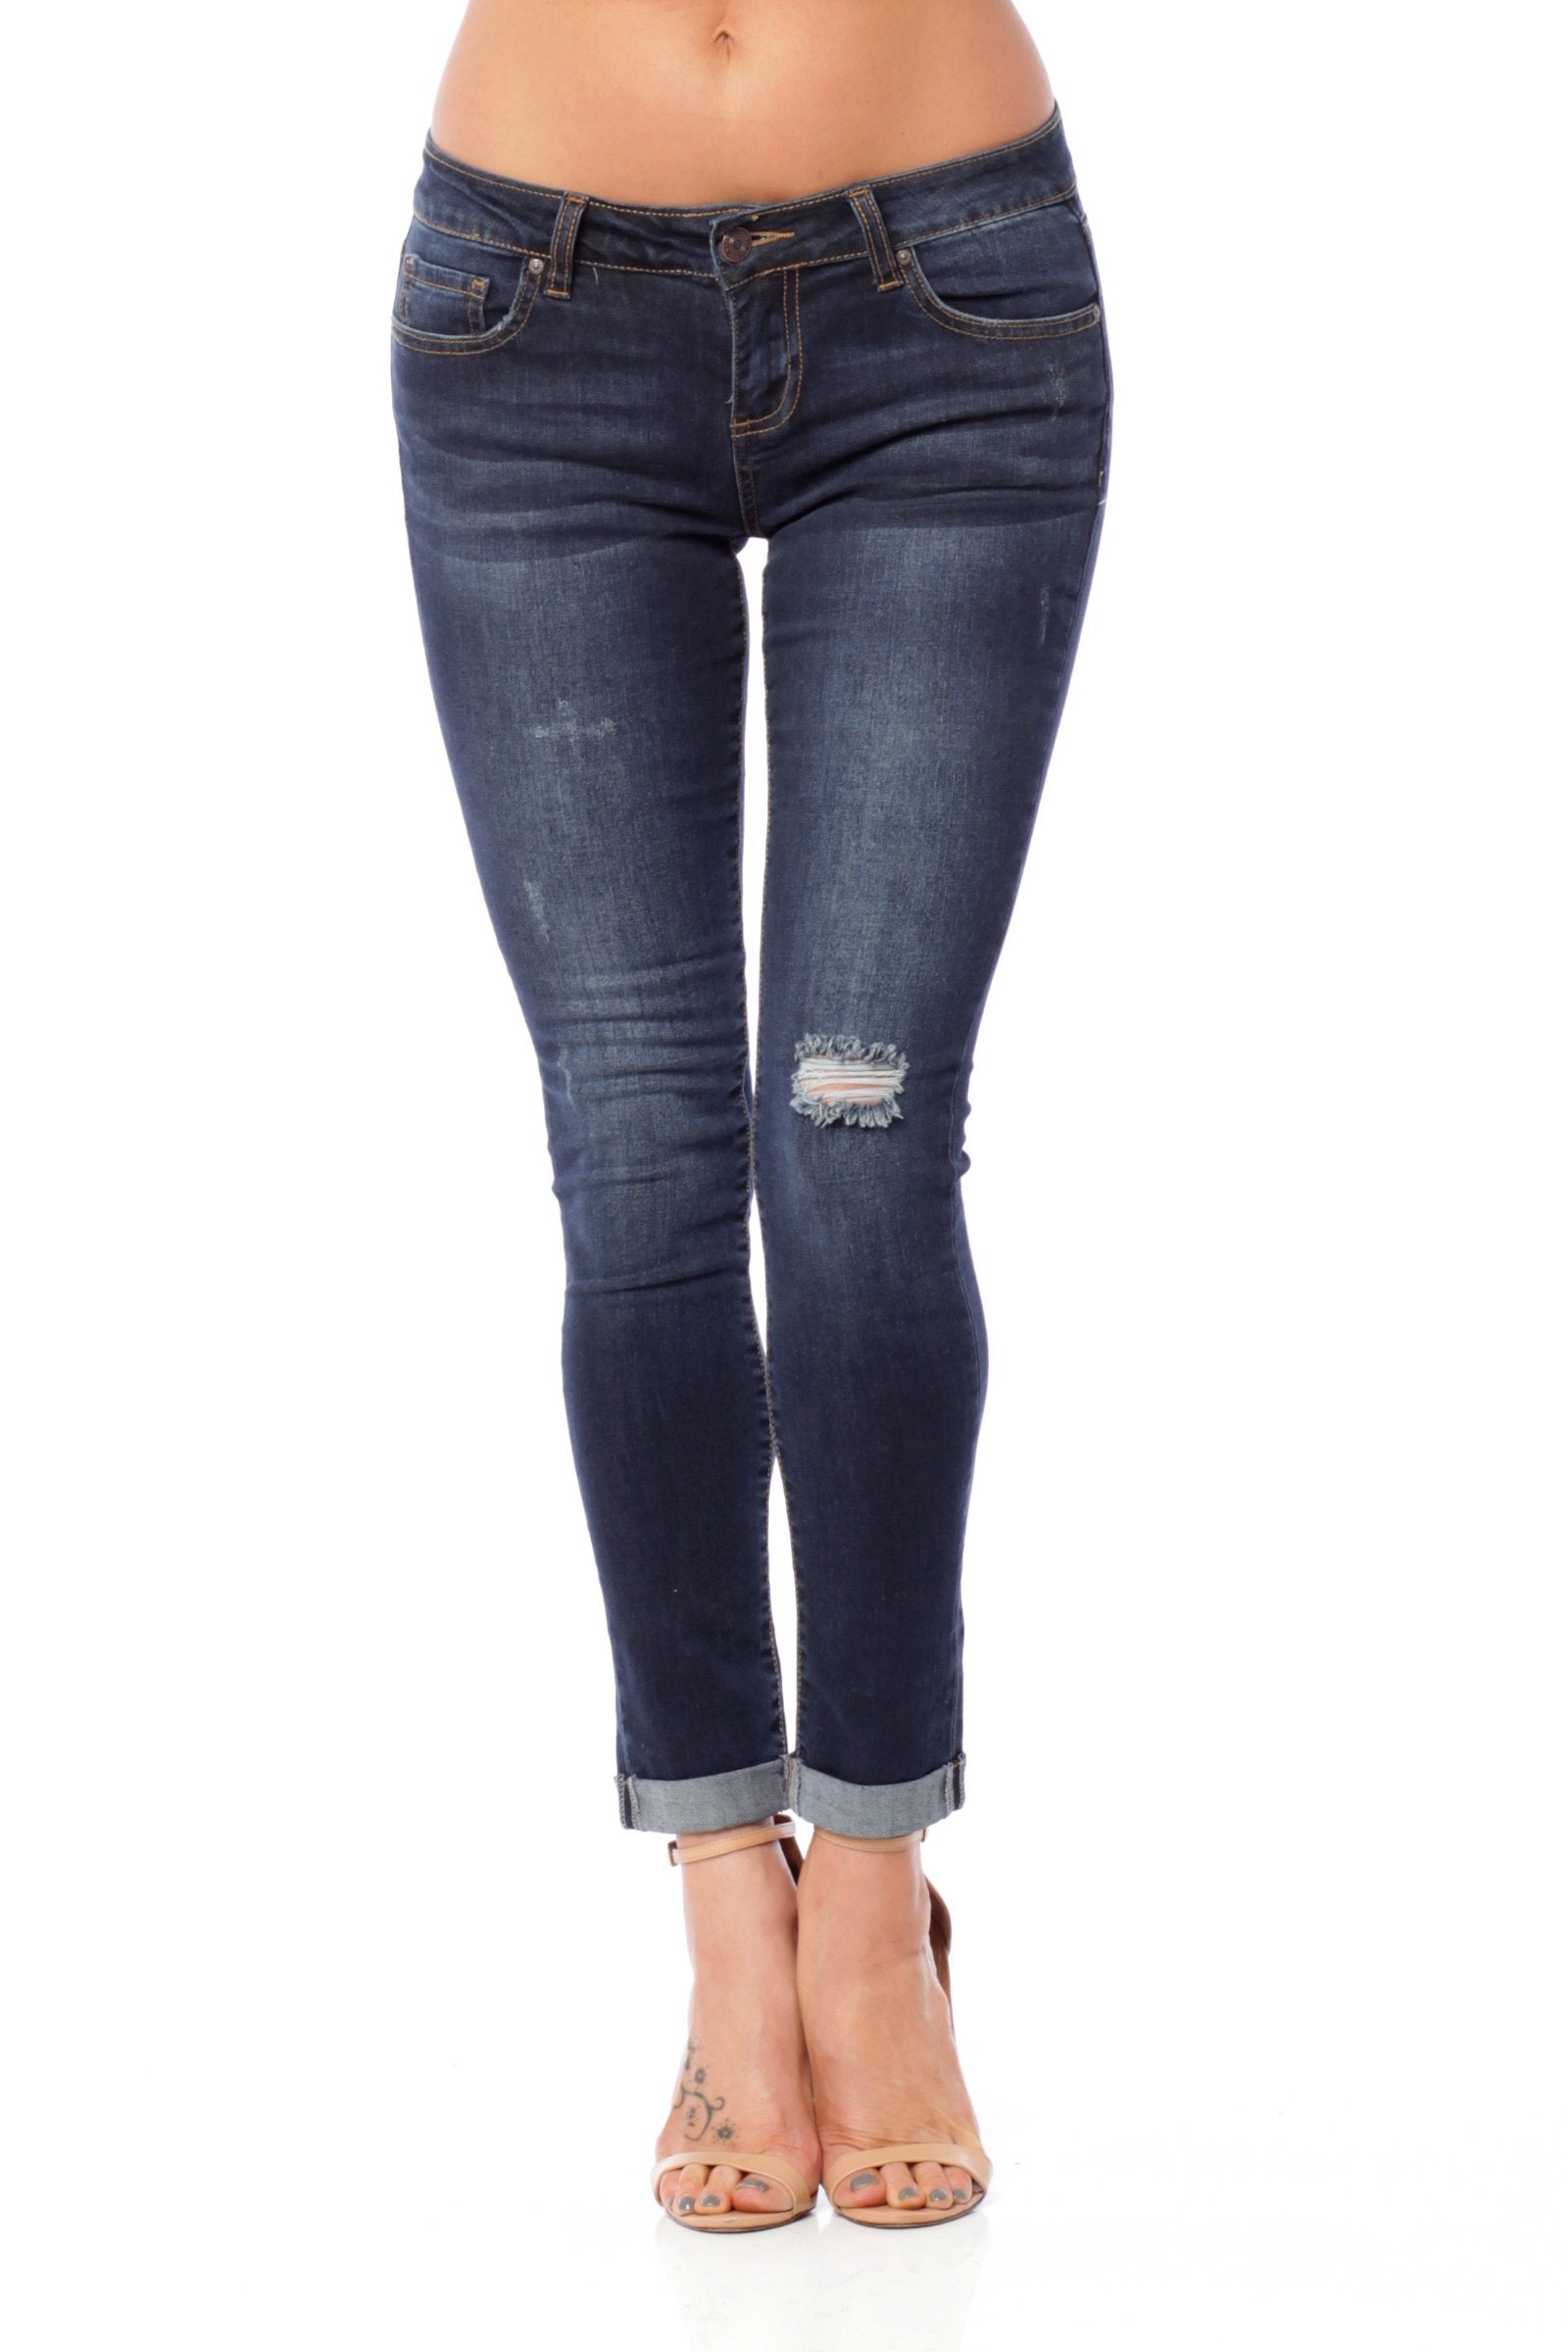 Hollywood Star Fashion Ripped Skinny Rolled Up Ankle Jean